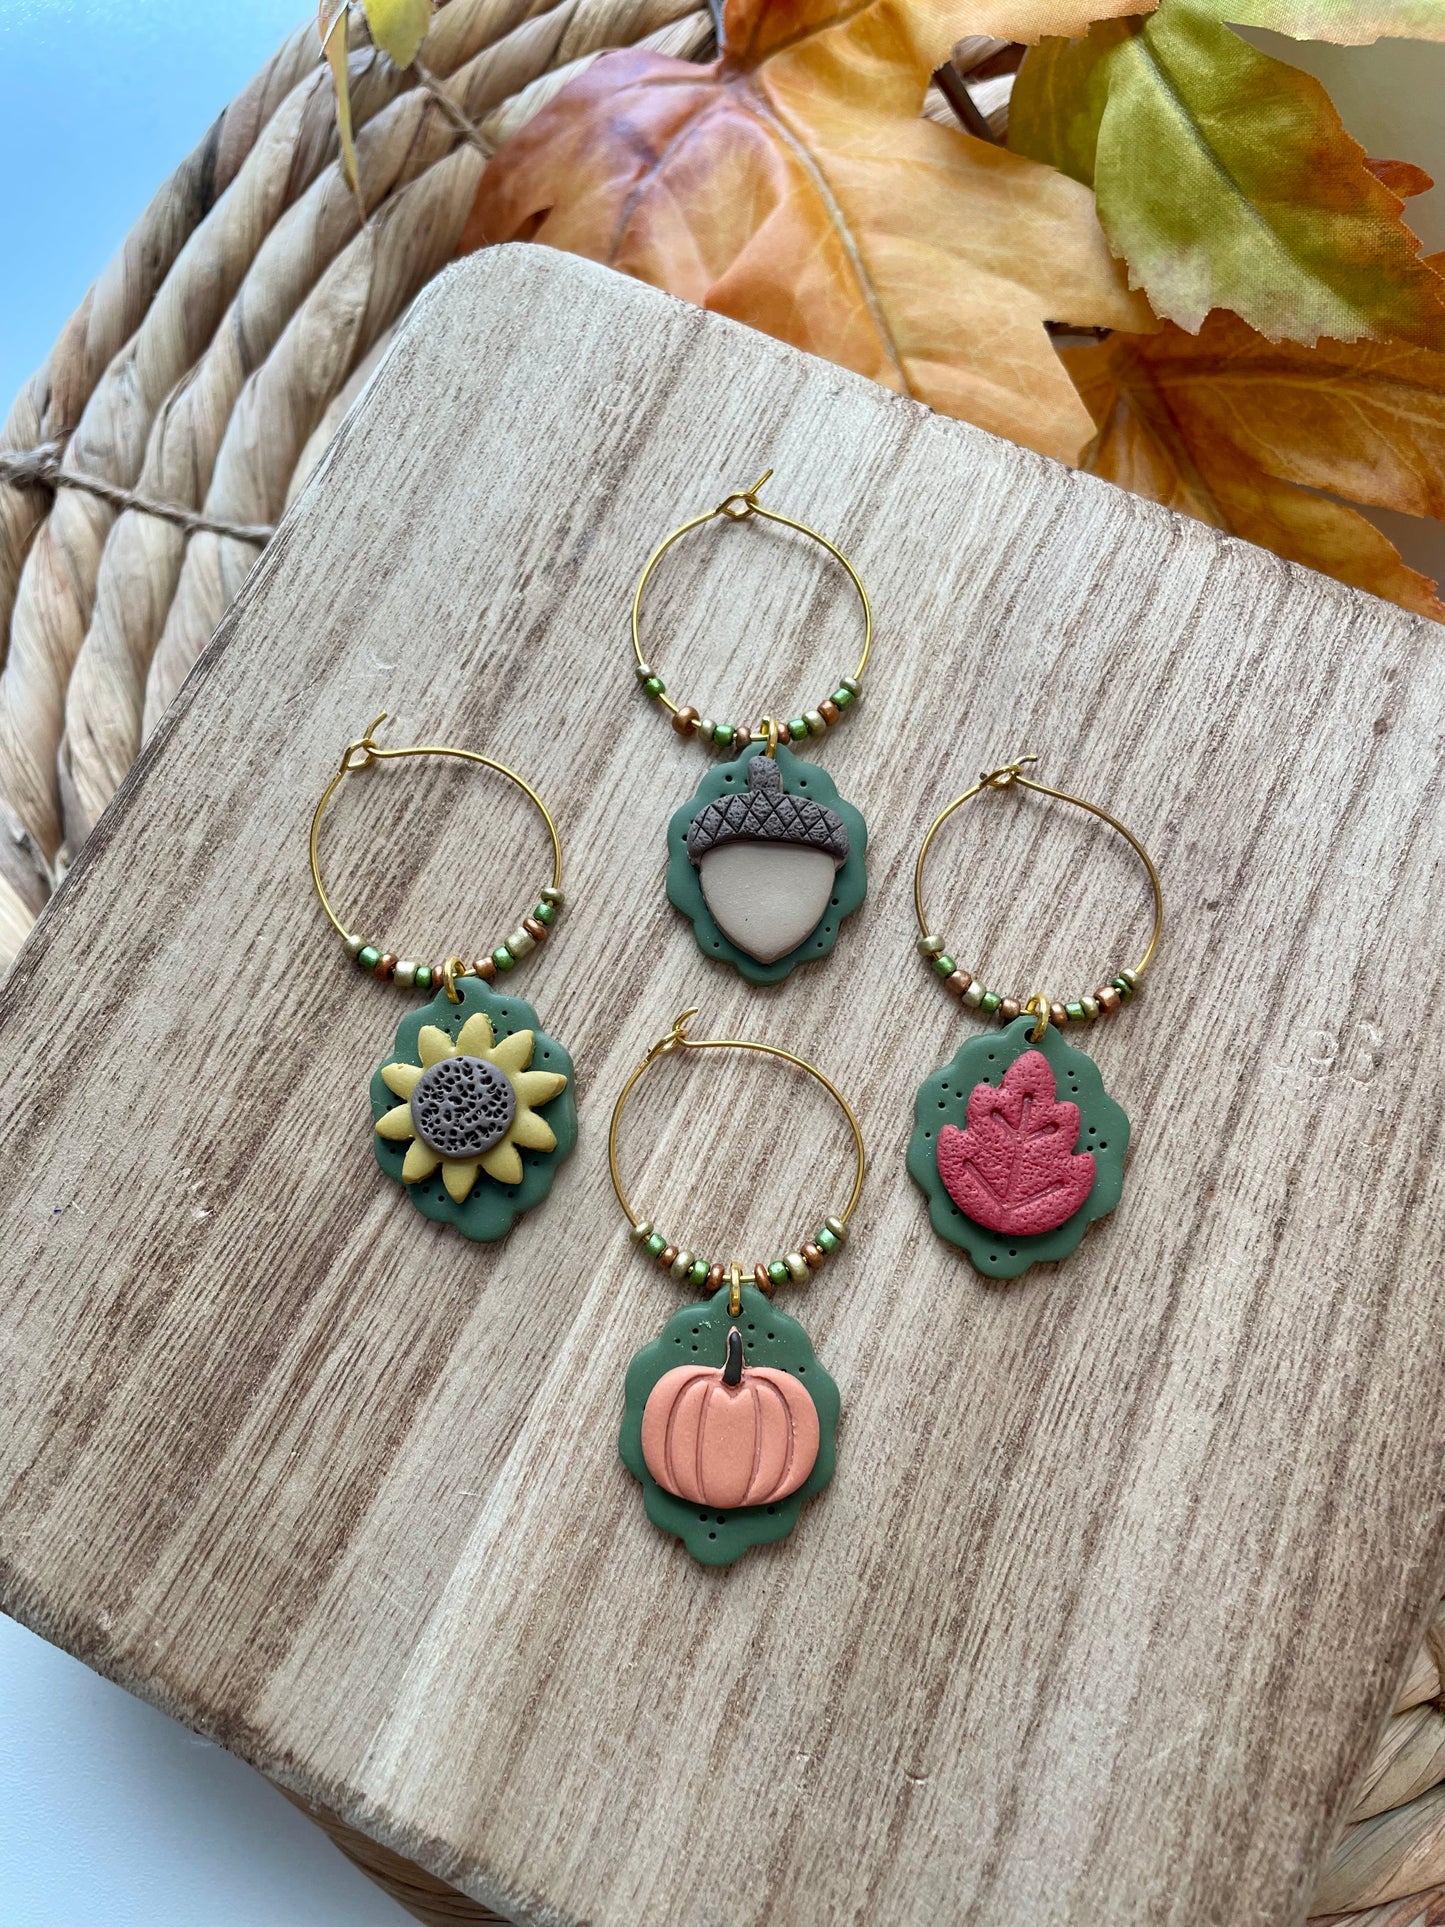 Cozy Fall Wine Charms